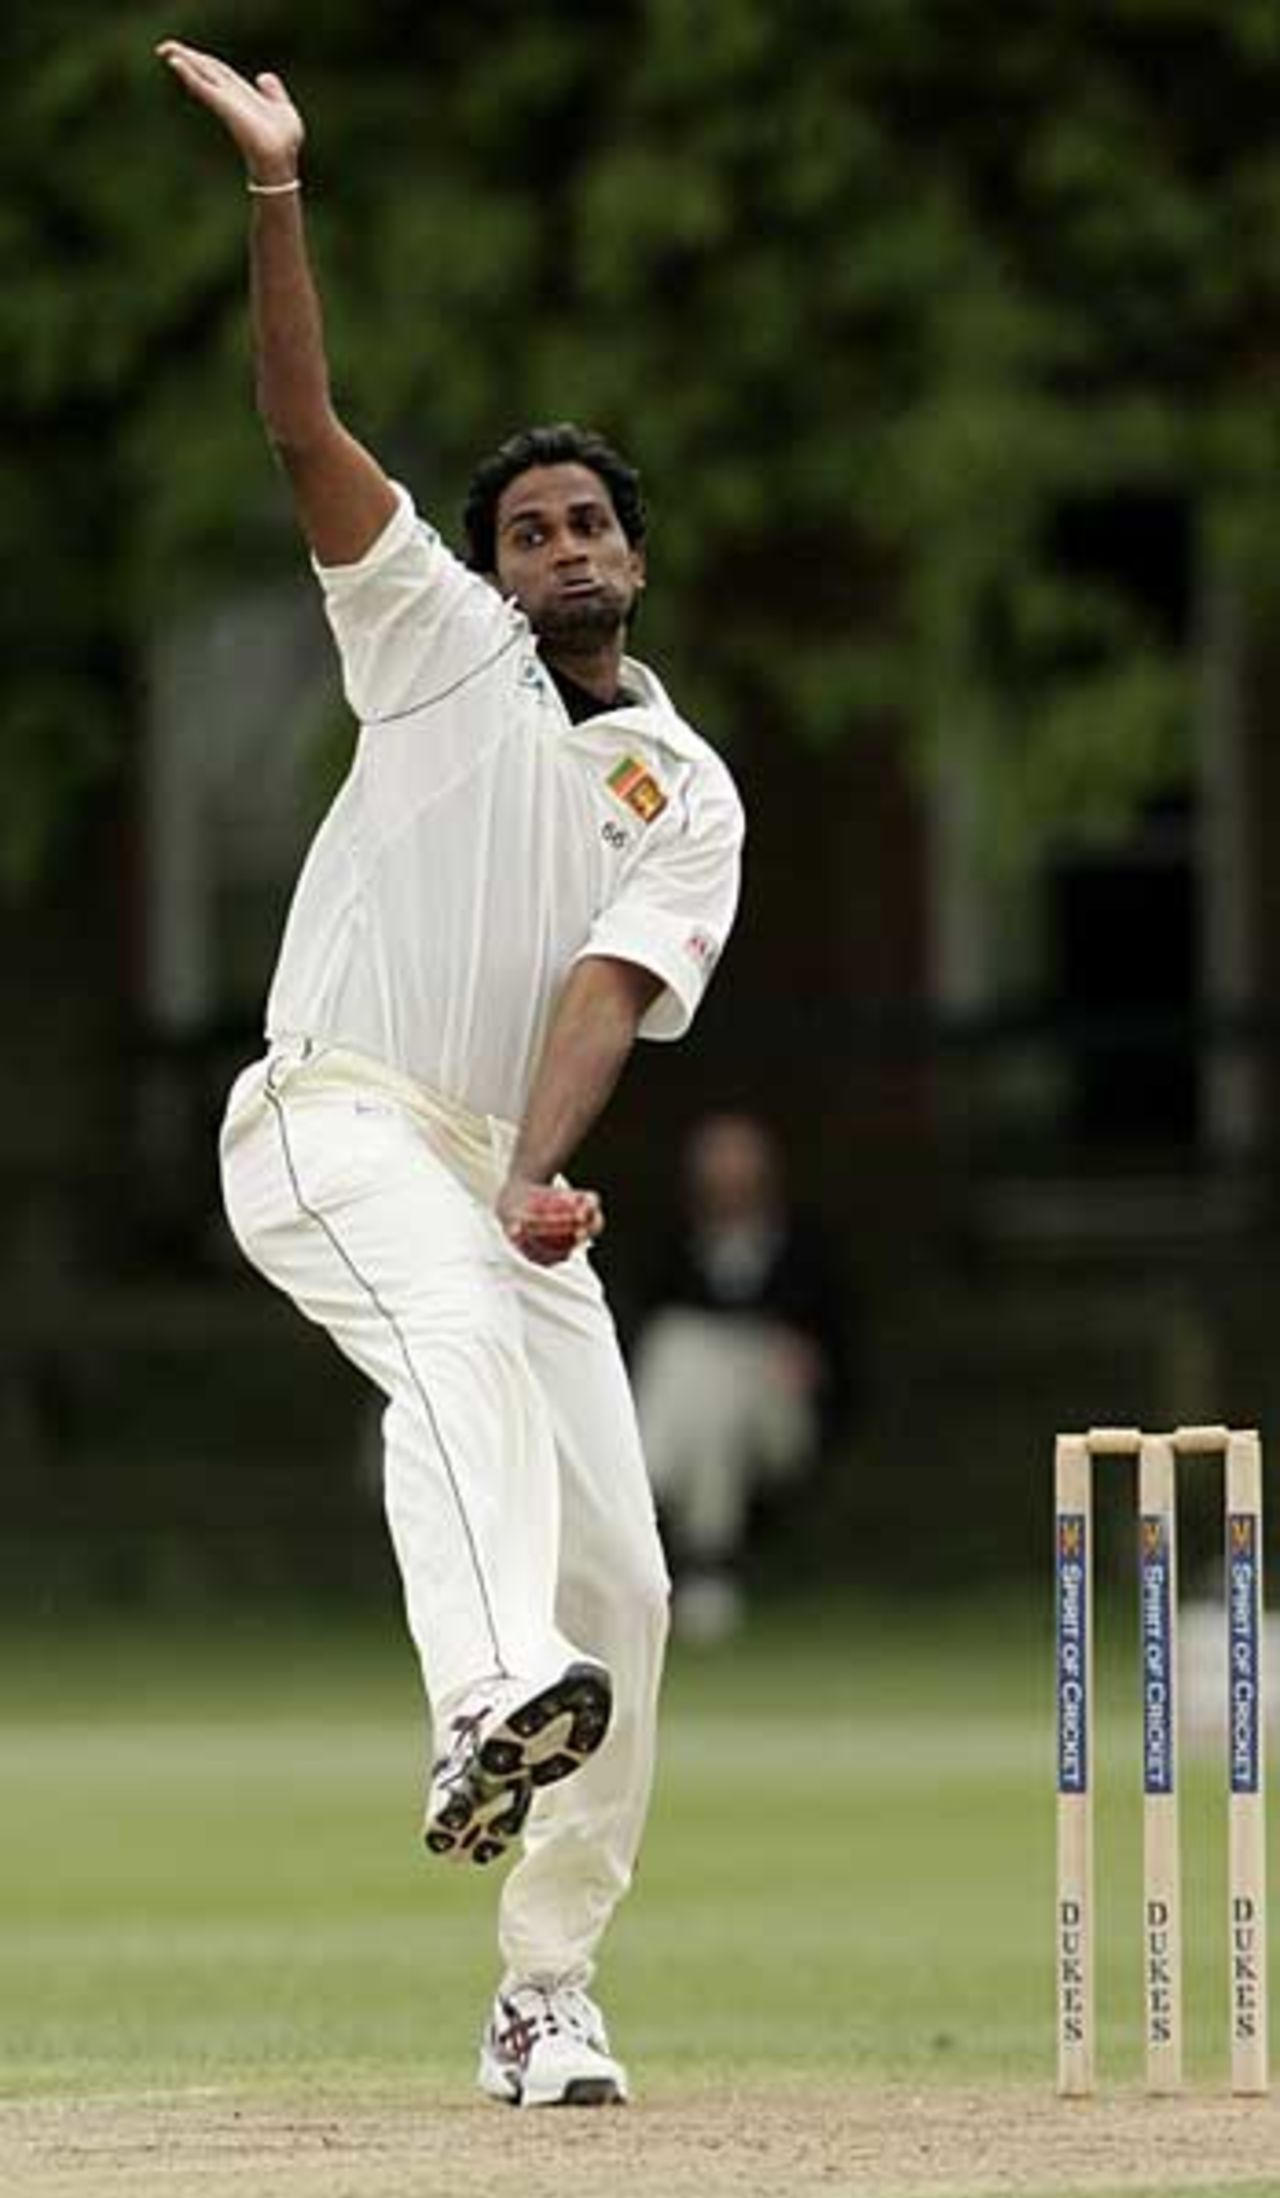 Nuwan Zoysa in his delivery stride, British Universities v Sri Lankans, Tour match, Fenner's, April 26, 2006